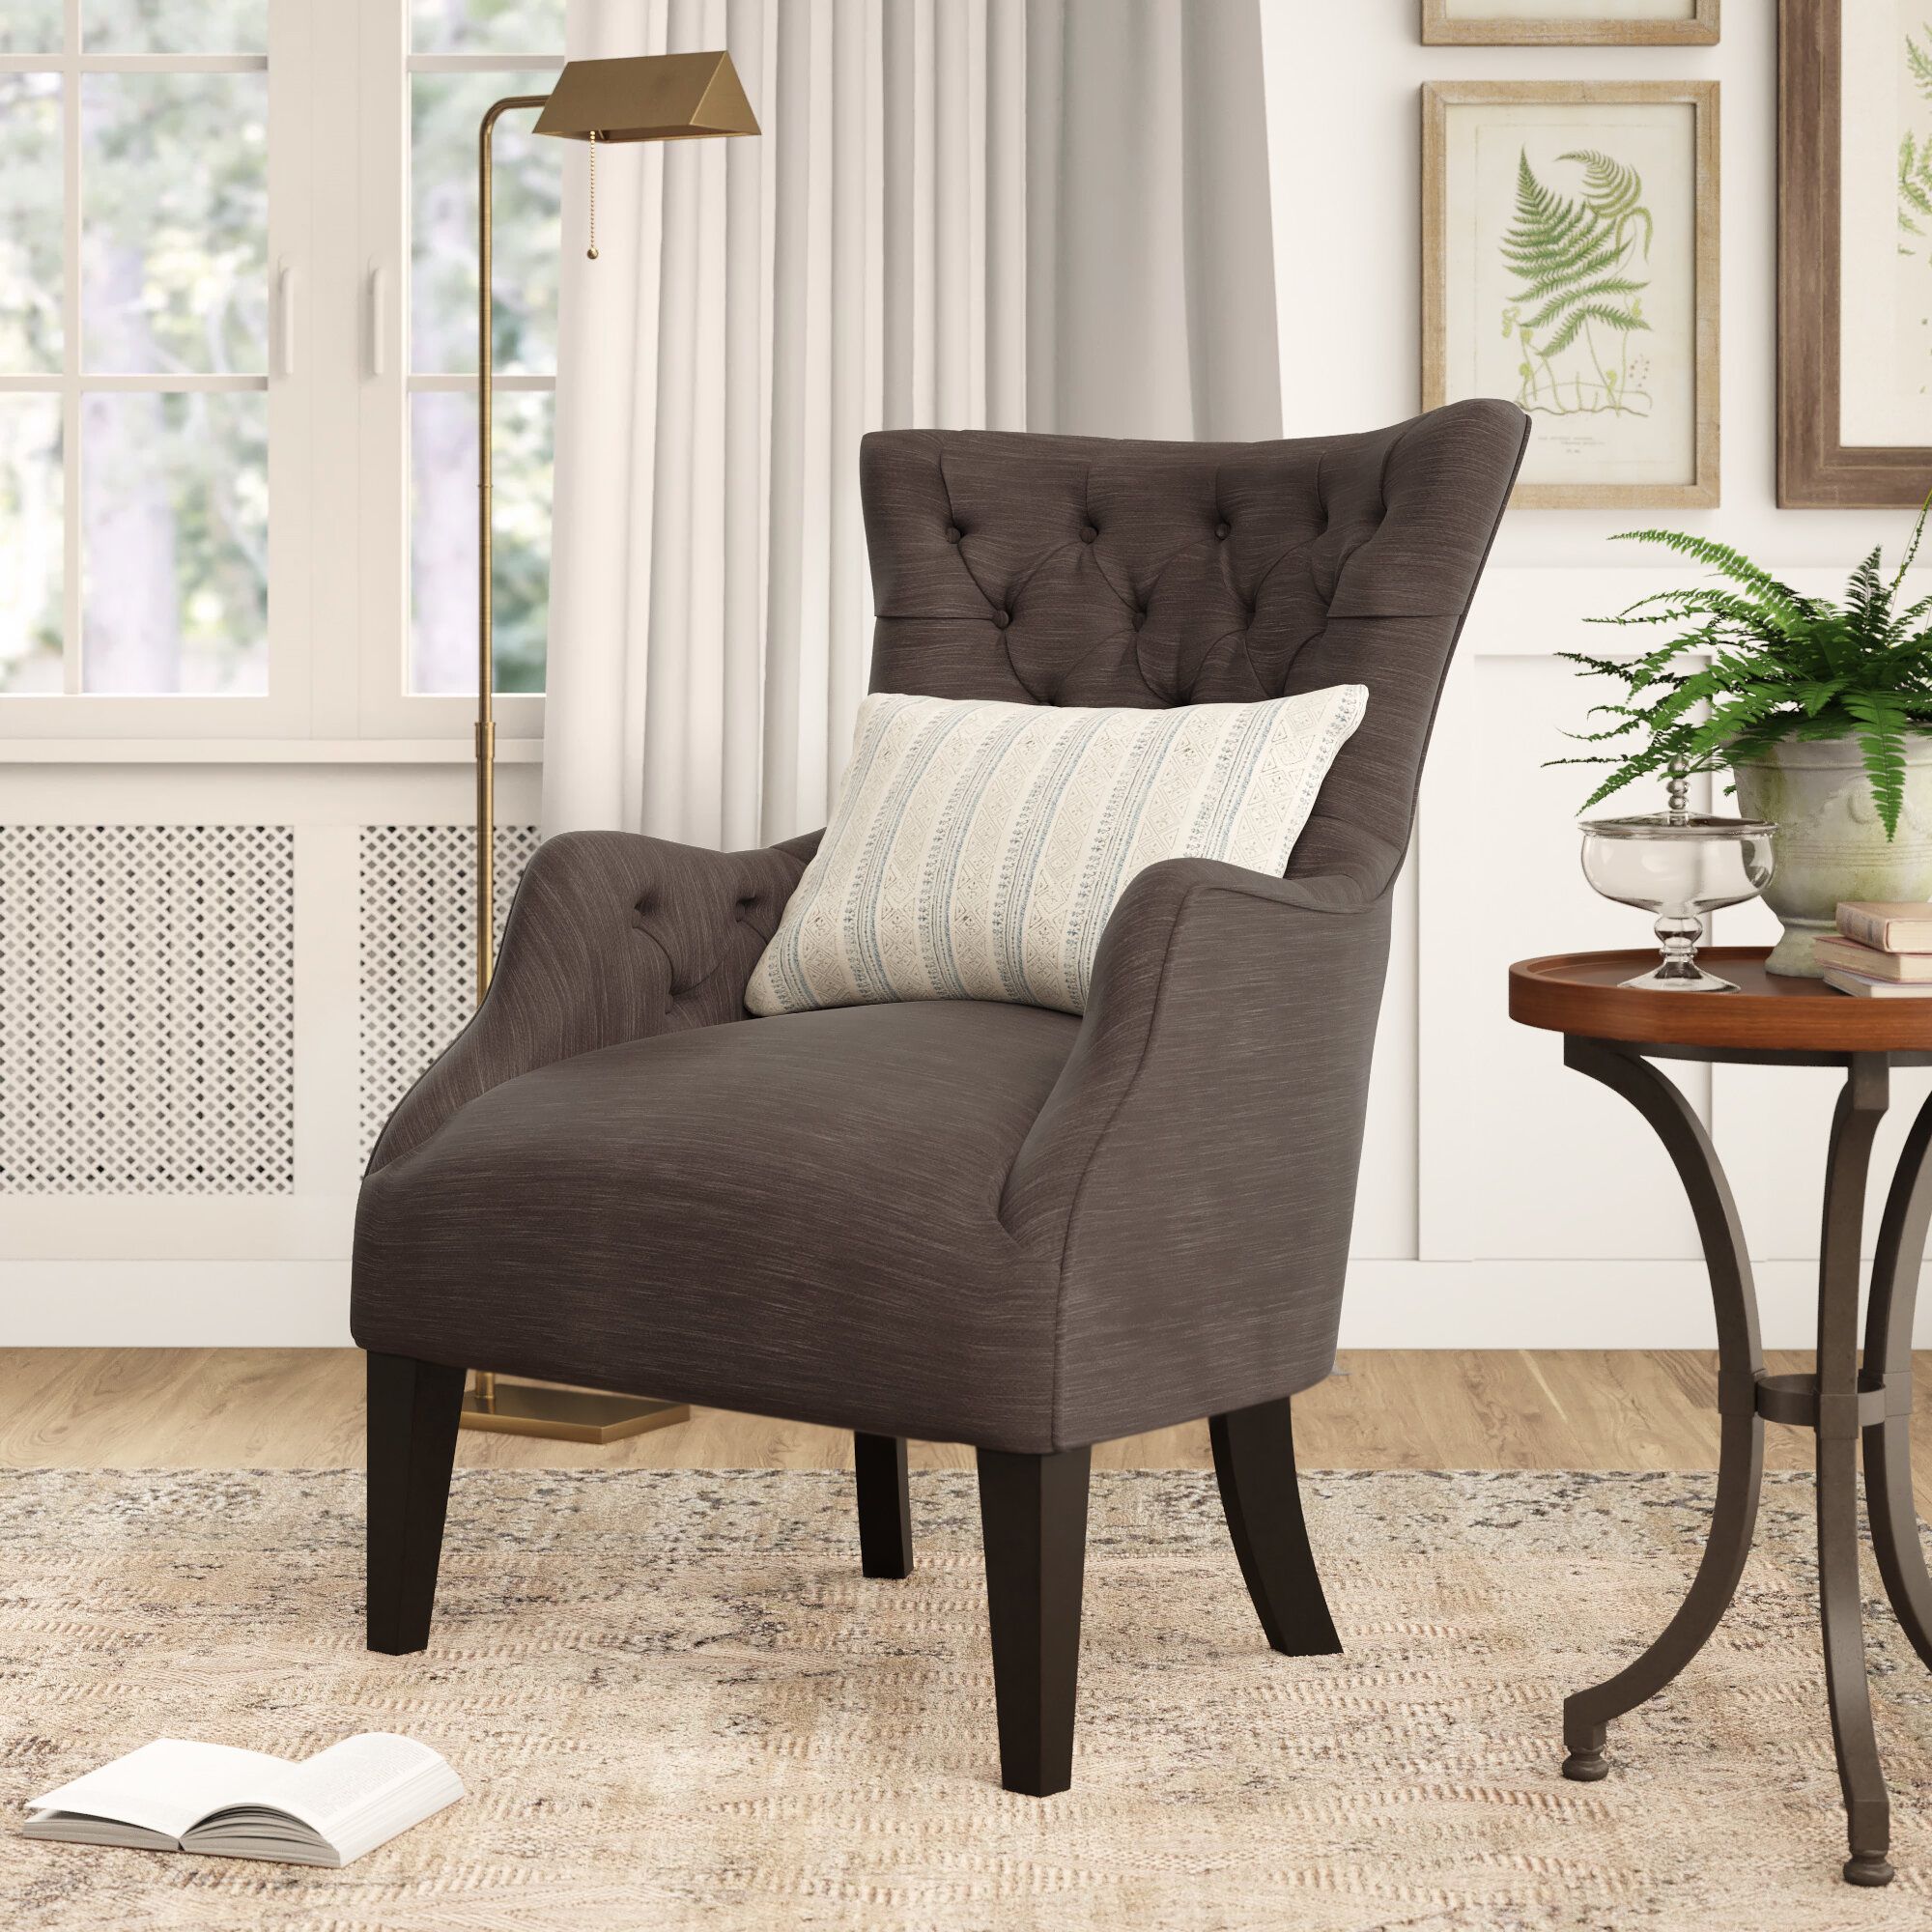 Polyester & Polyester Blend Birch Lane™ Accent Chairs You'Ll In Galesville Tufted Polyester Wingback Chairs (View 5 of 15)